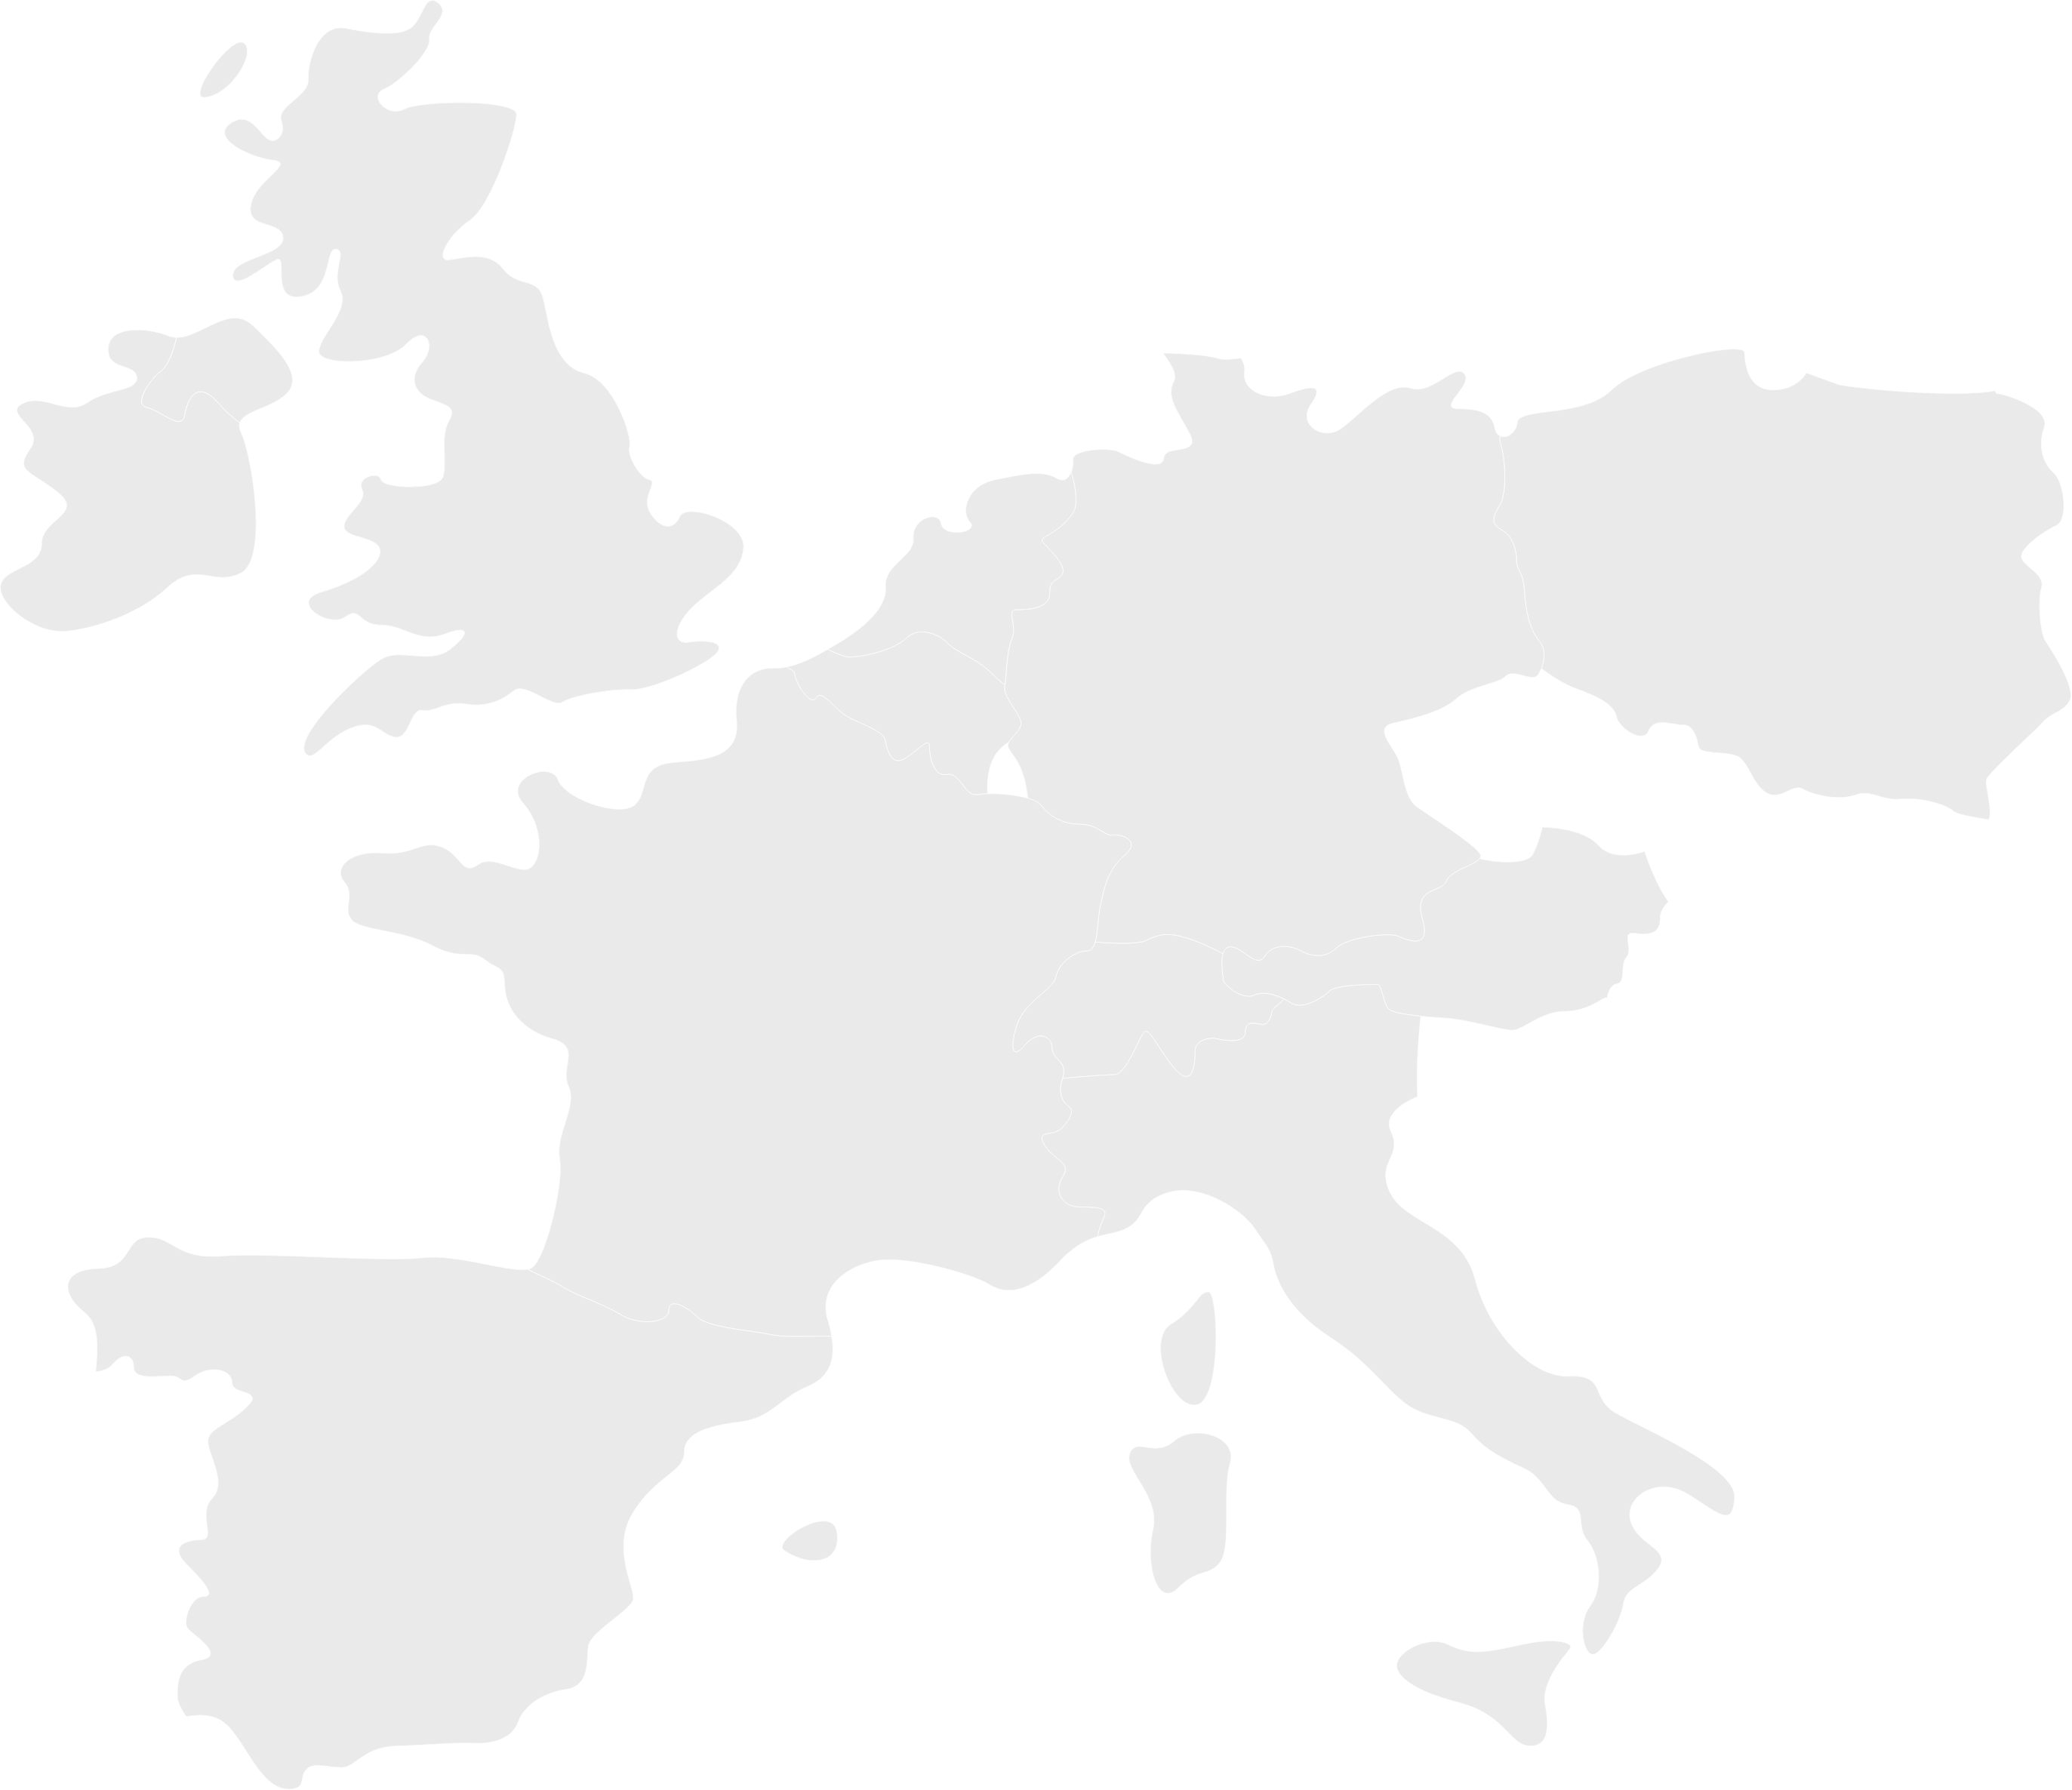 Illustrated map of Europe